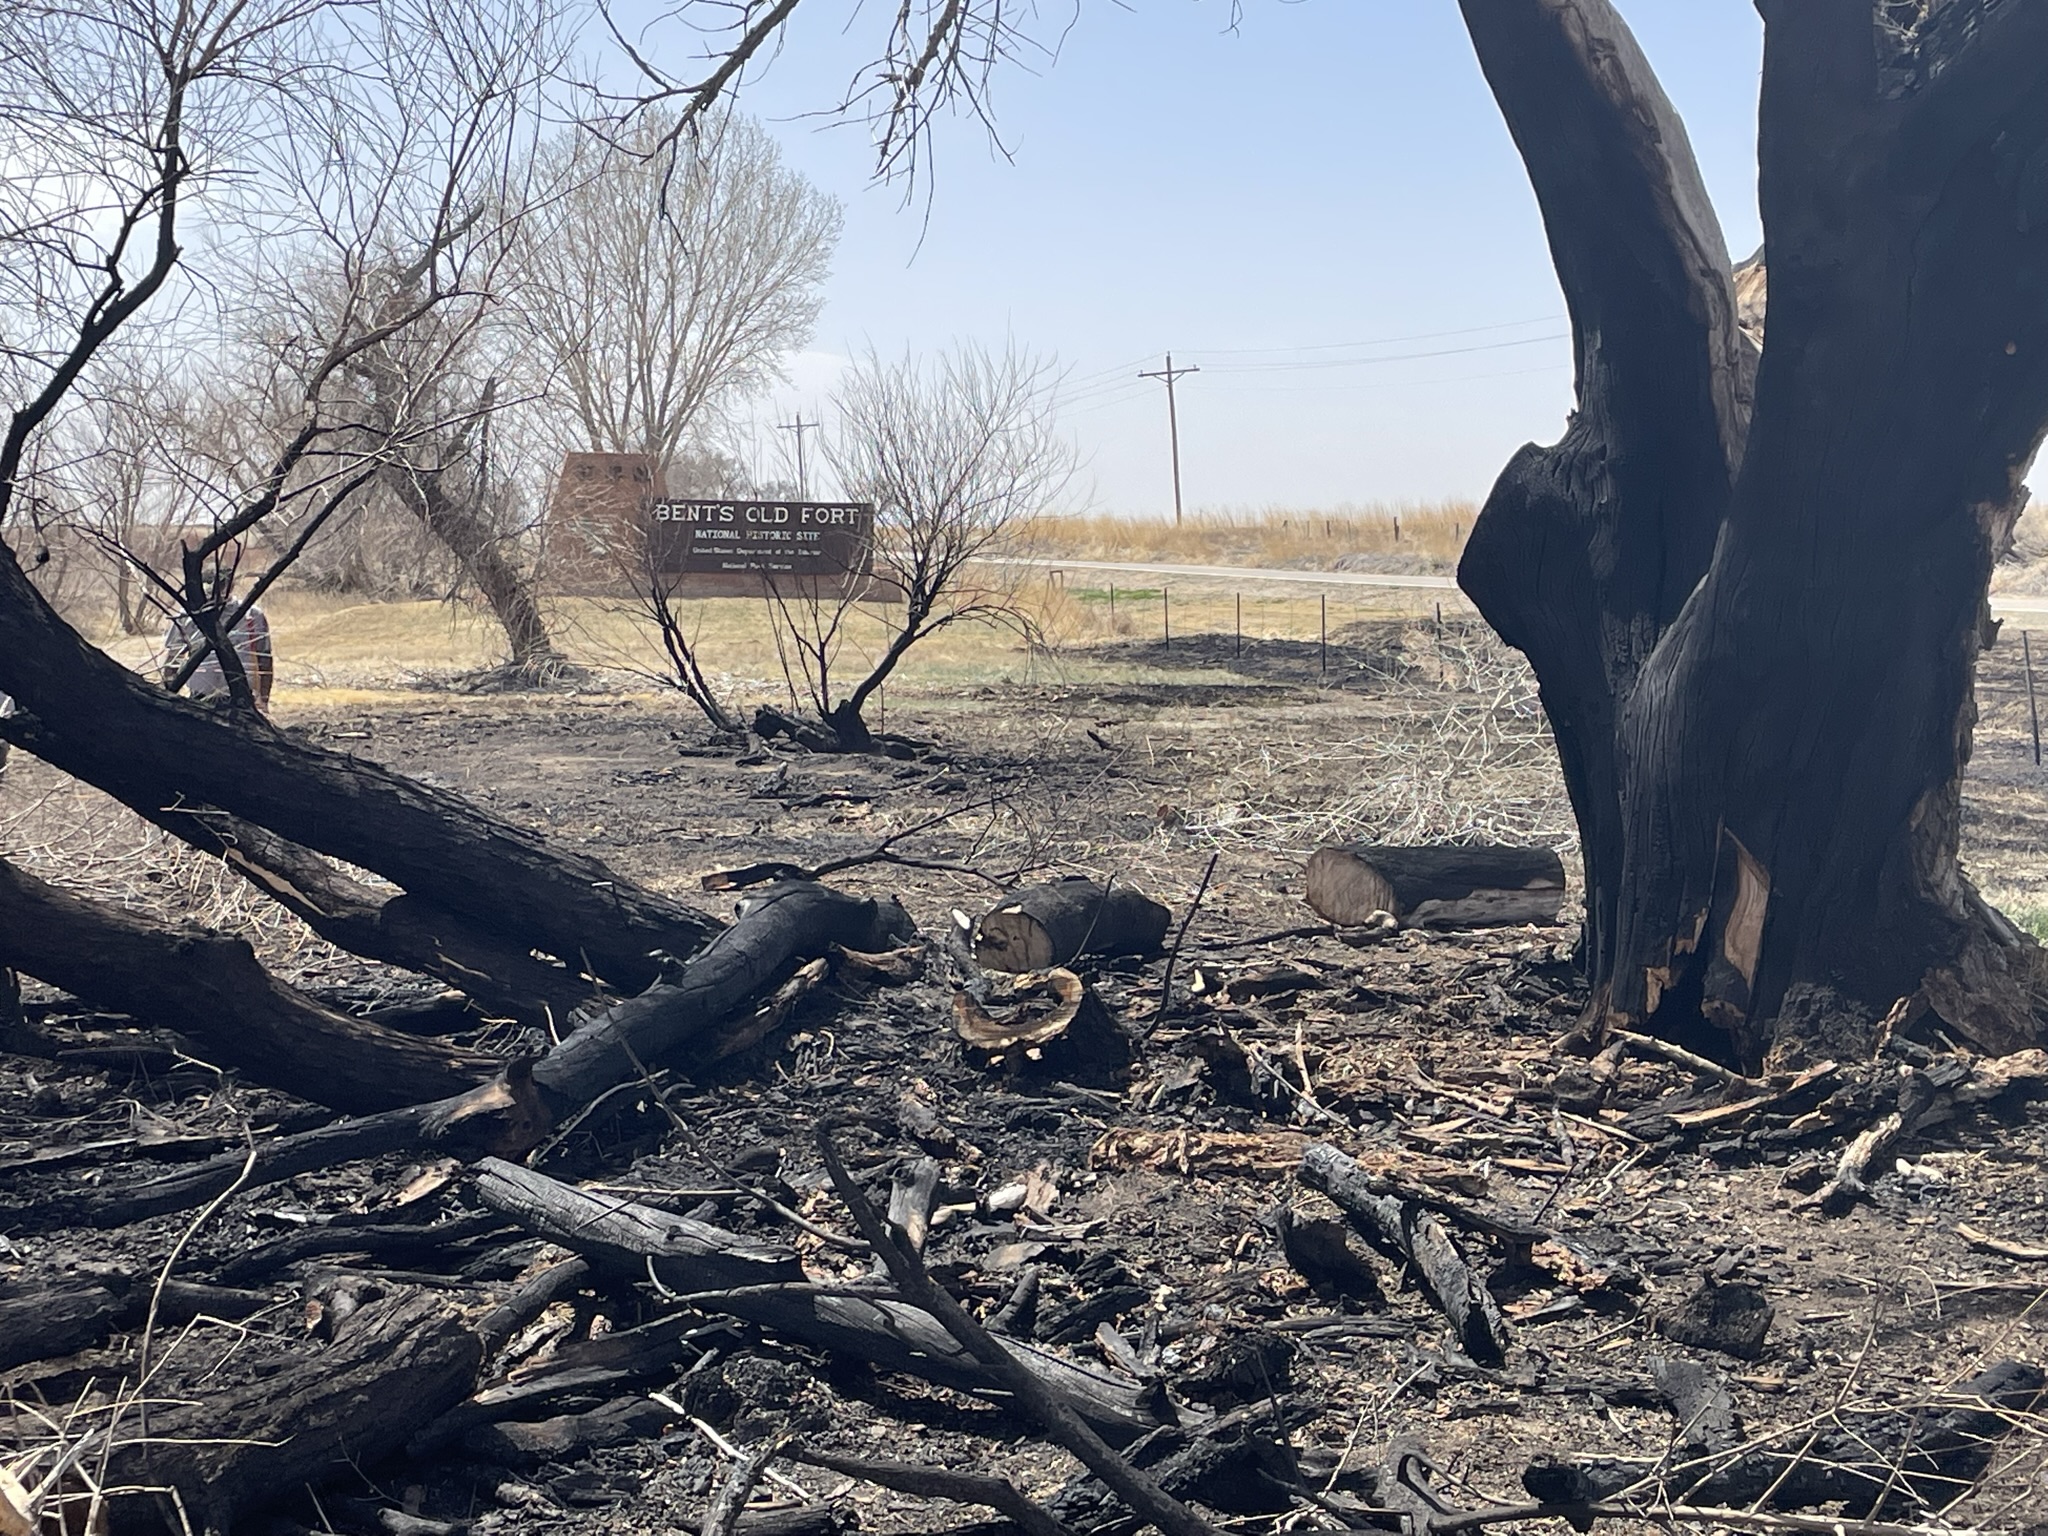 Bent’s Old Fort Wildfire Photo Gallery by Stuart West 